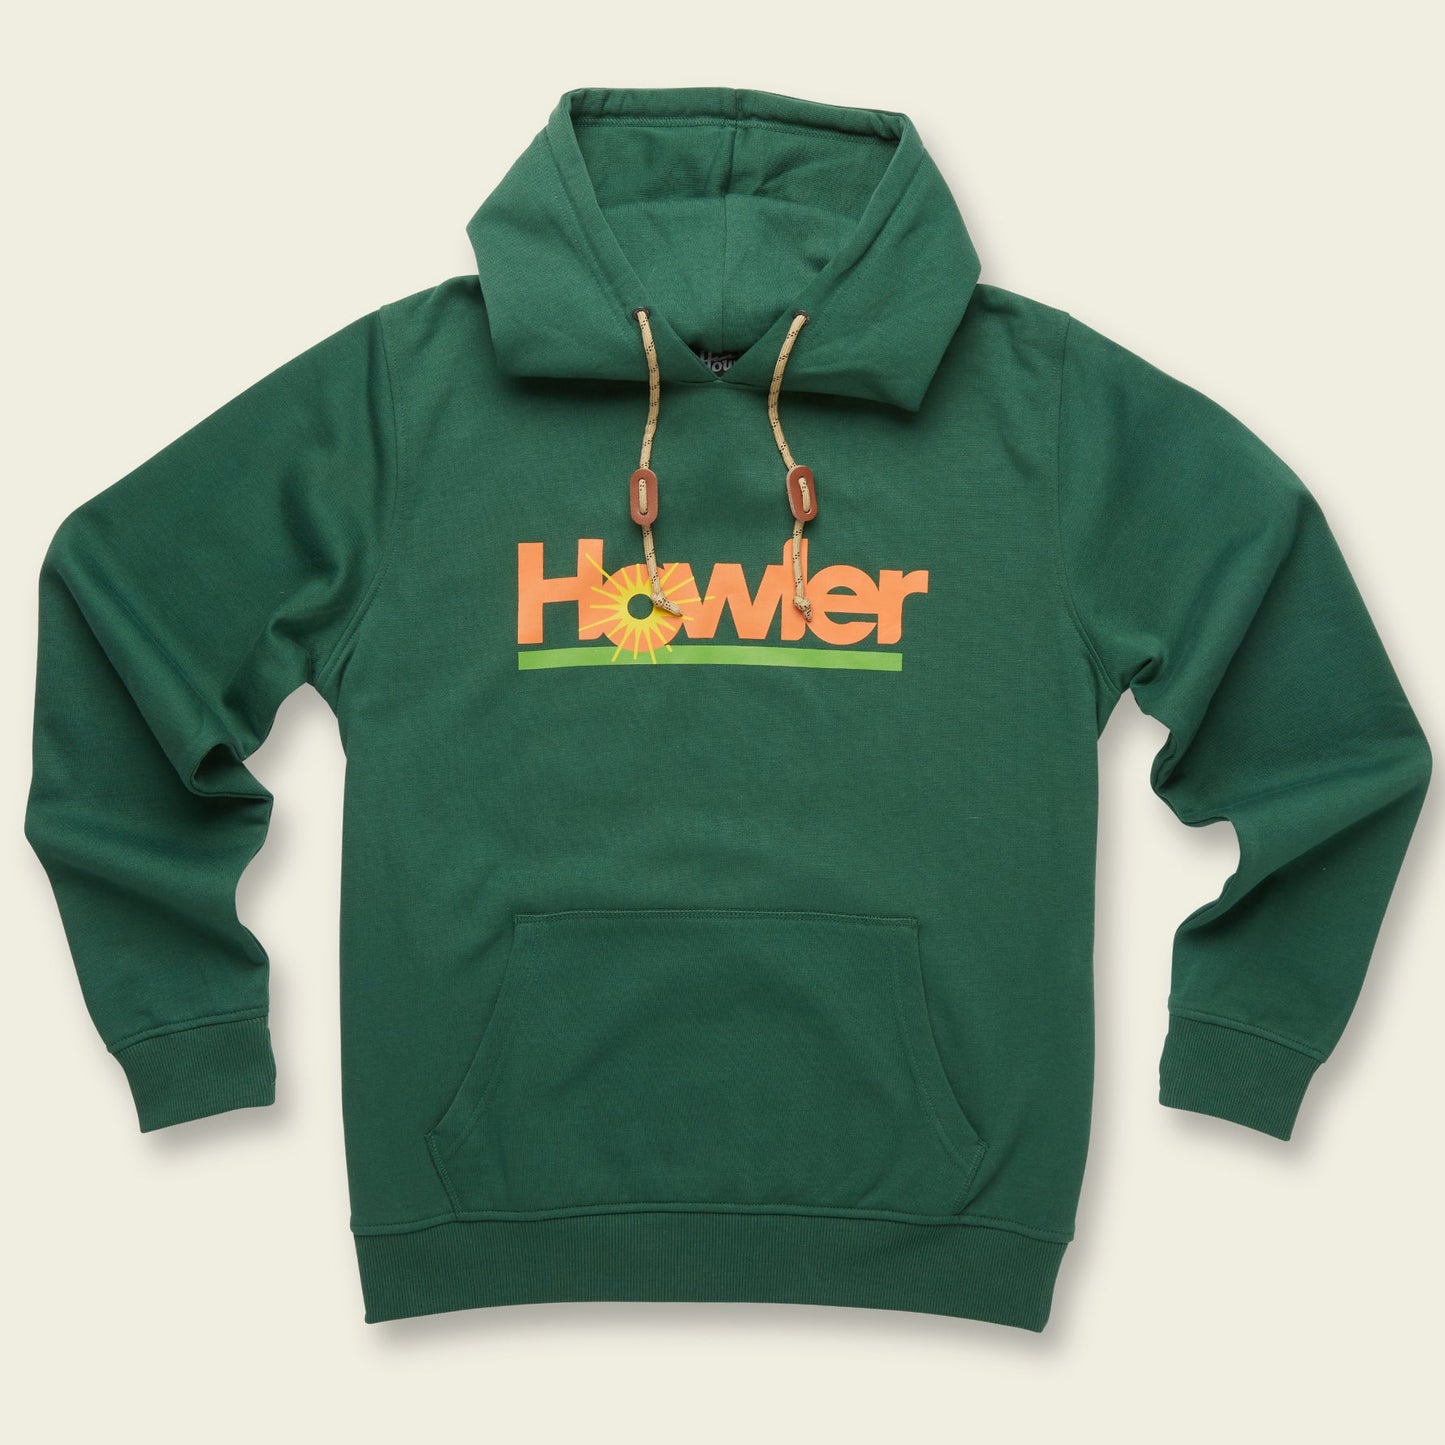 Select Pullover Hoodie